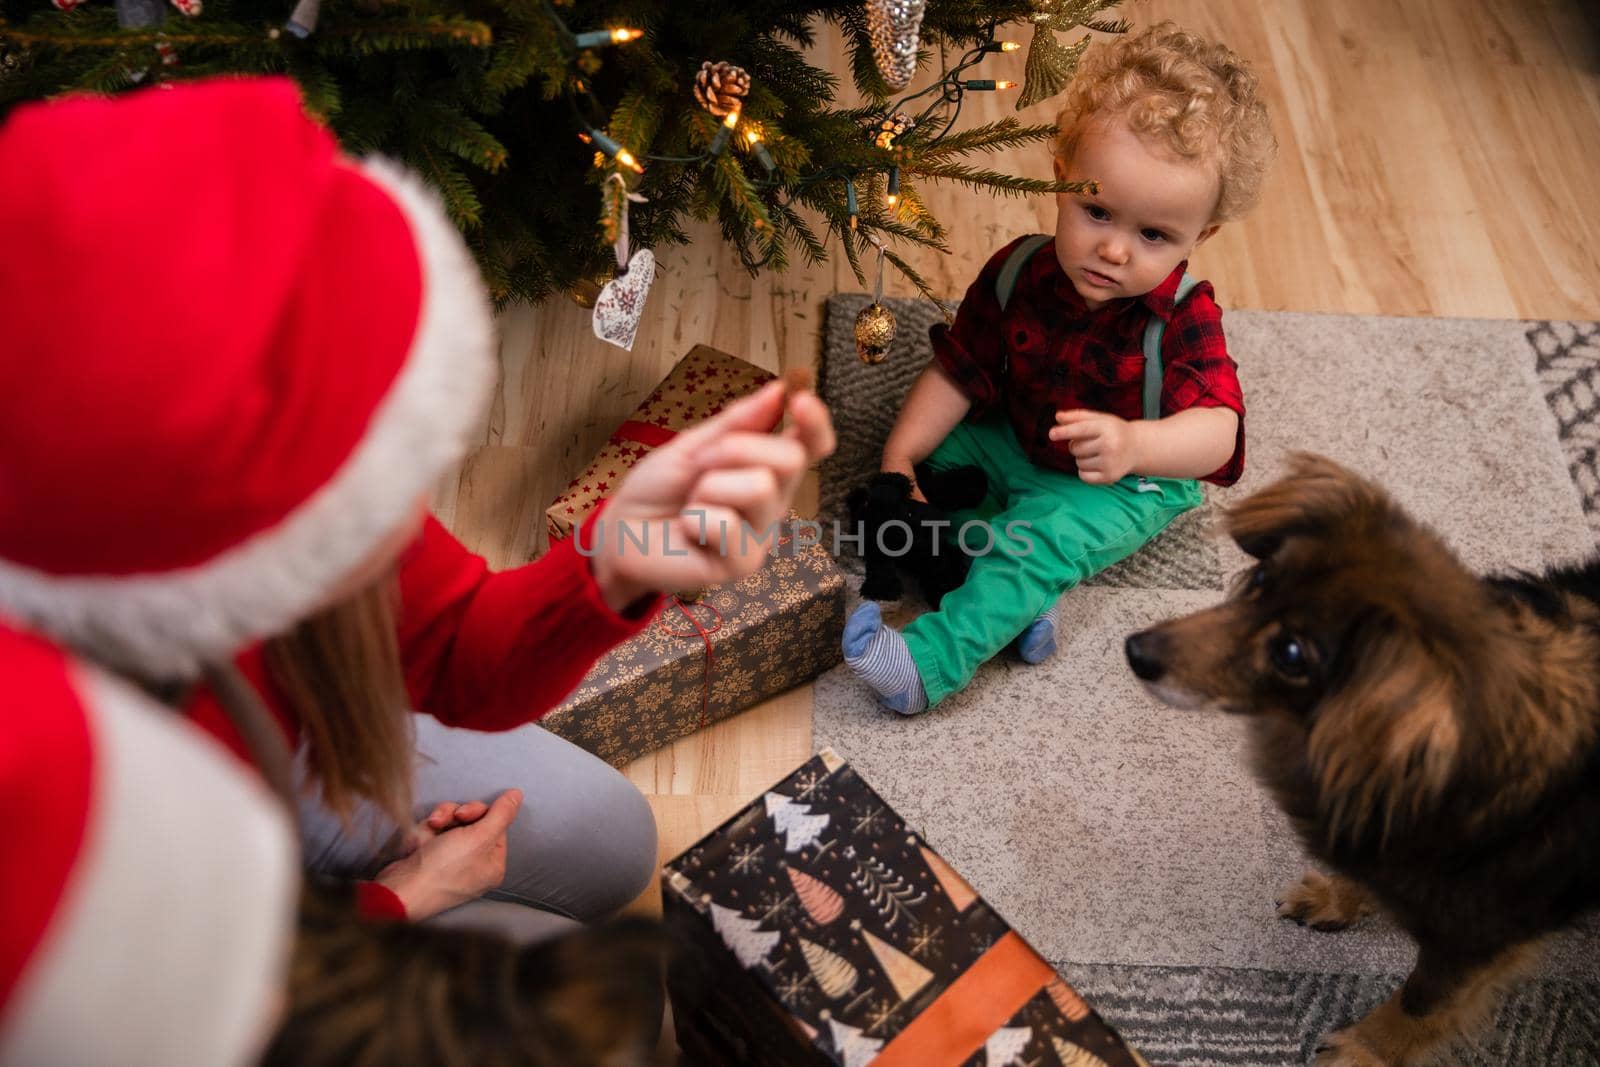 Mom and her two-year-old son are feeding a multi-racial dog in the living room right next to the Christmas tree. A boy with curly blond hair.